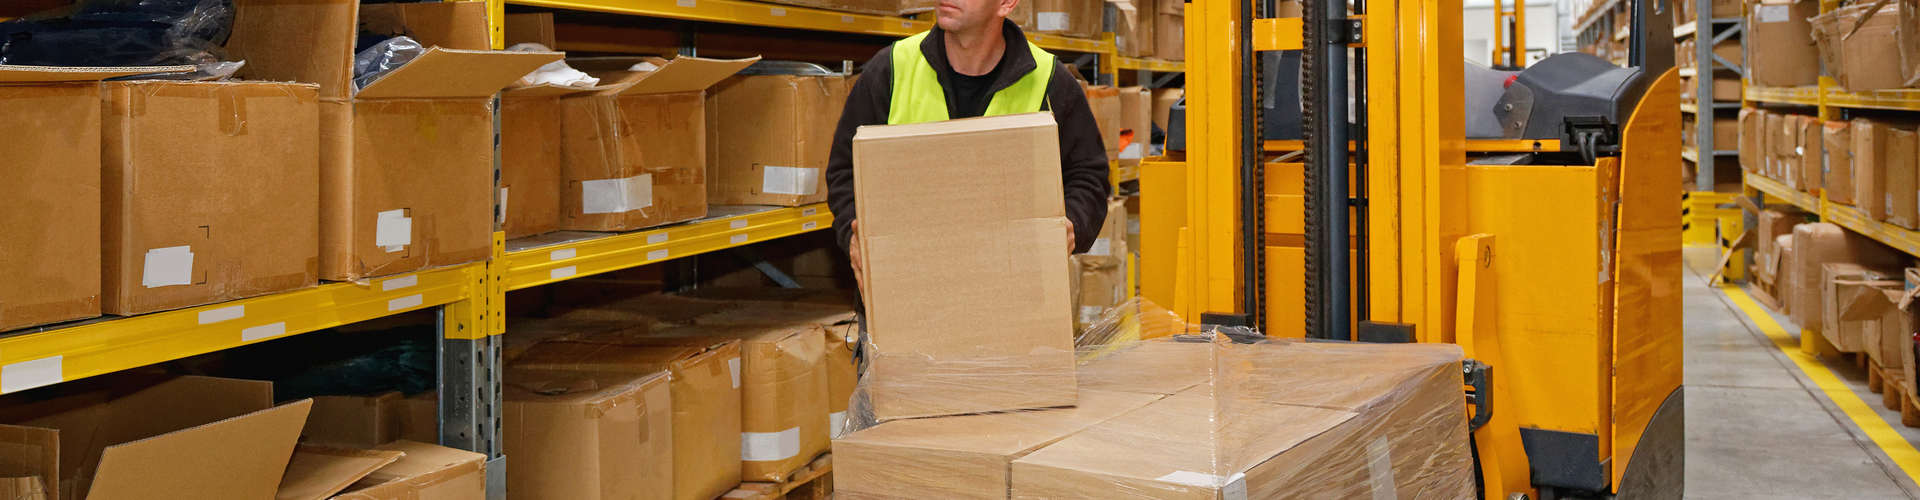 Pick and Pack Fulfillment